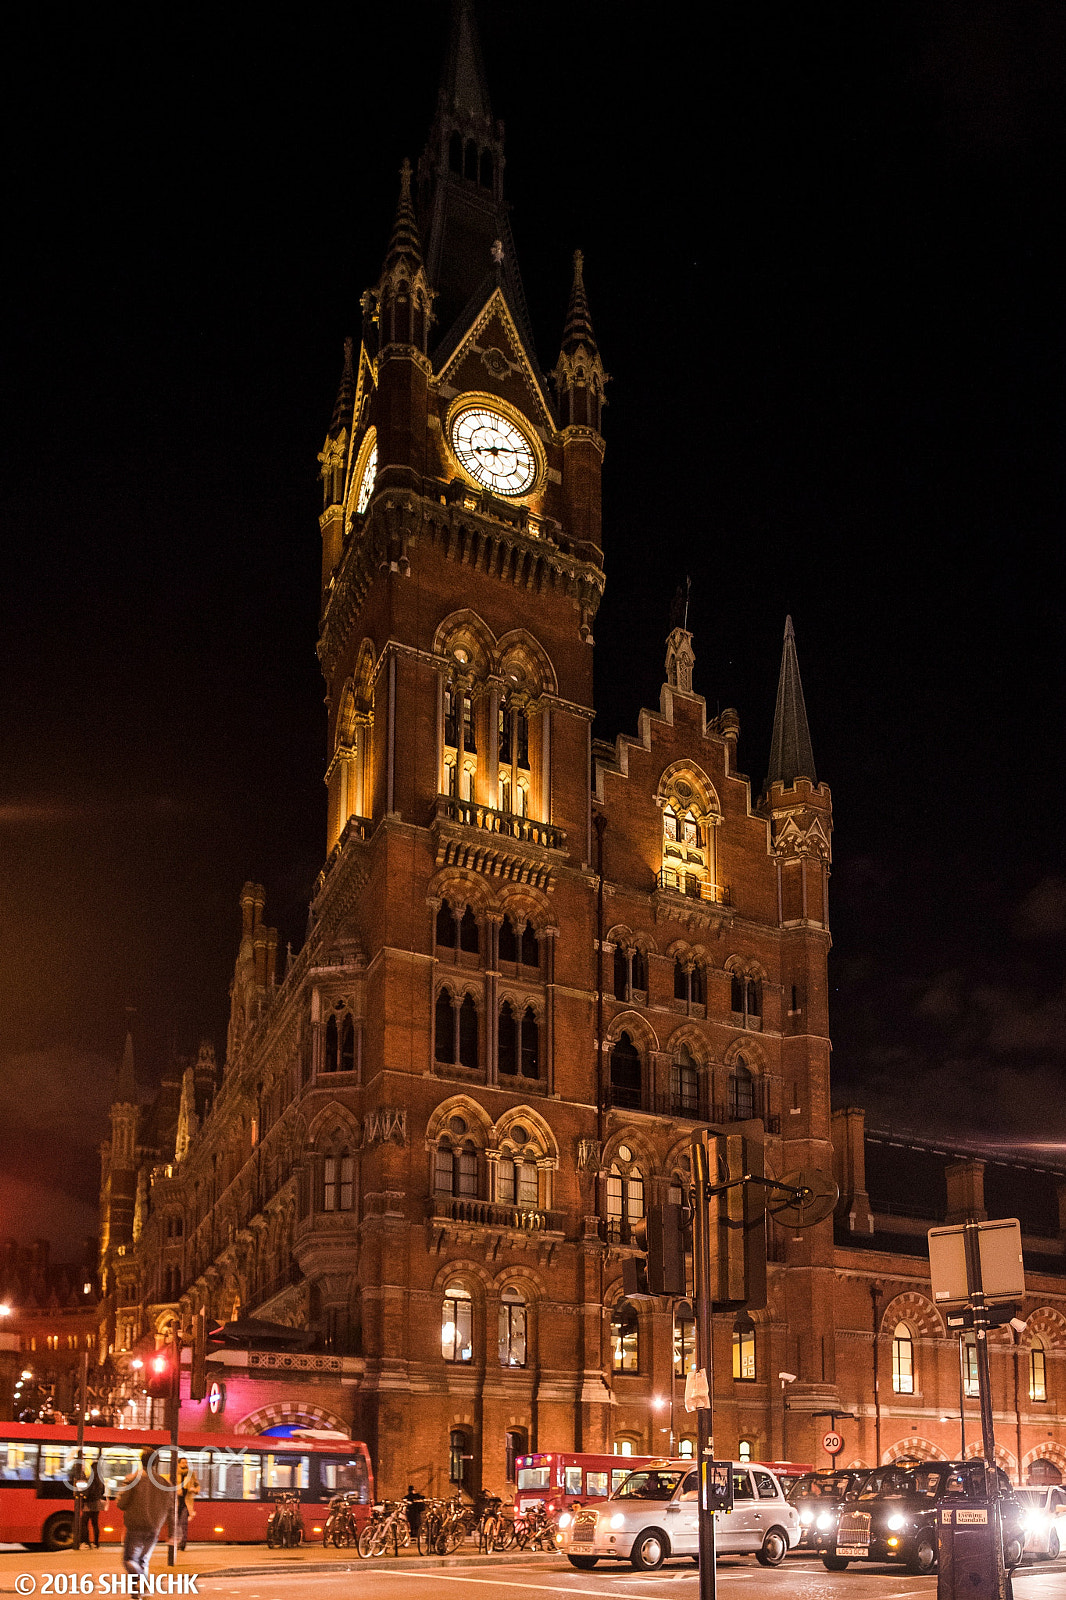 24mm F3.5 sample photo. St. pancras railway station in london photography